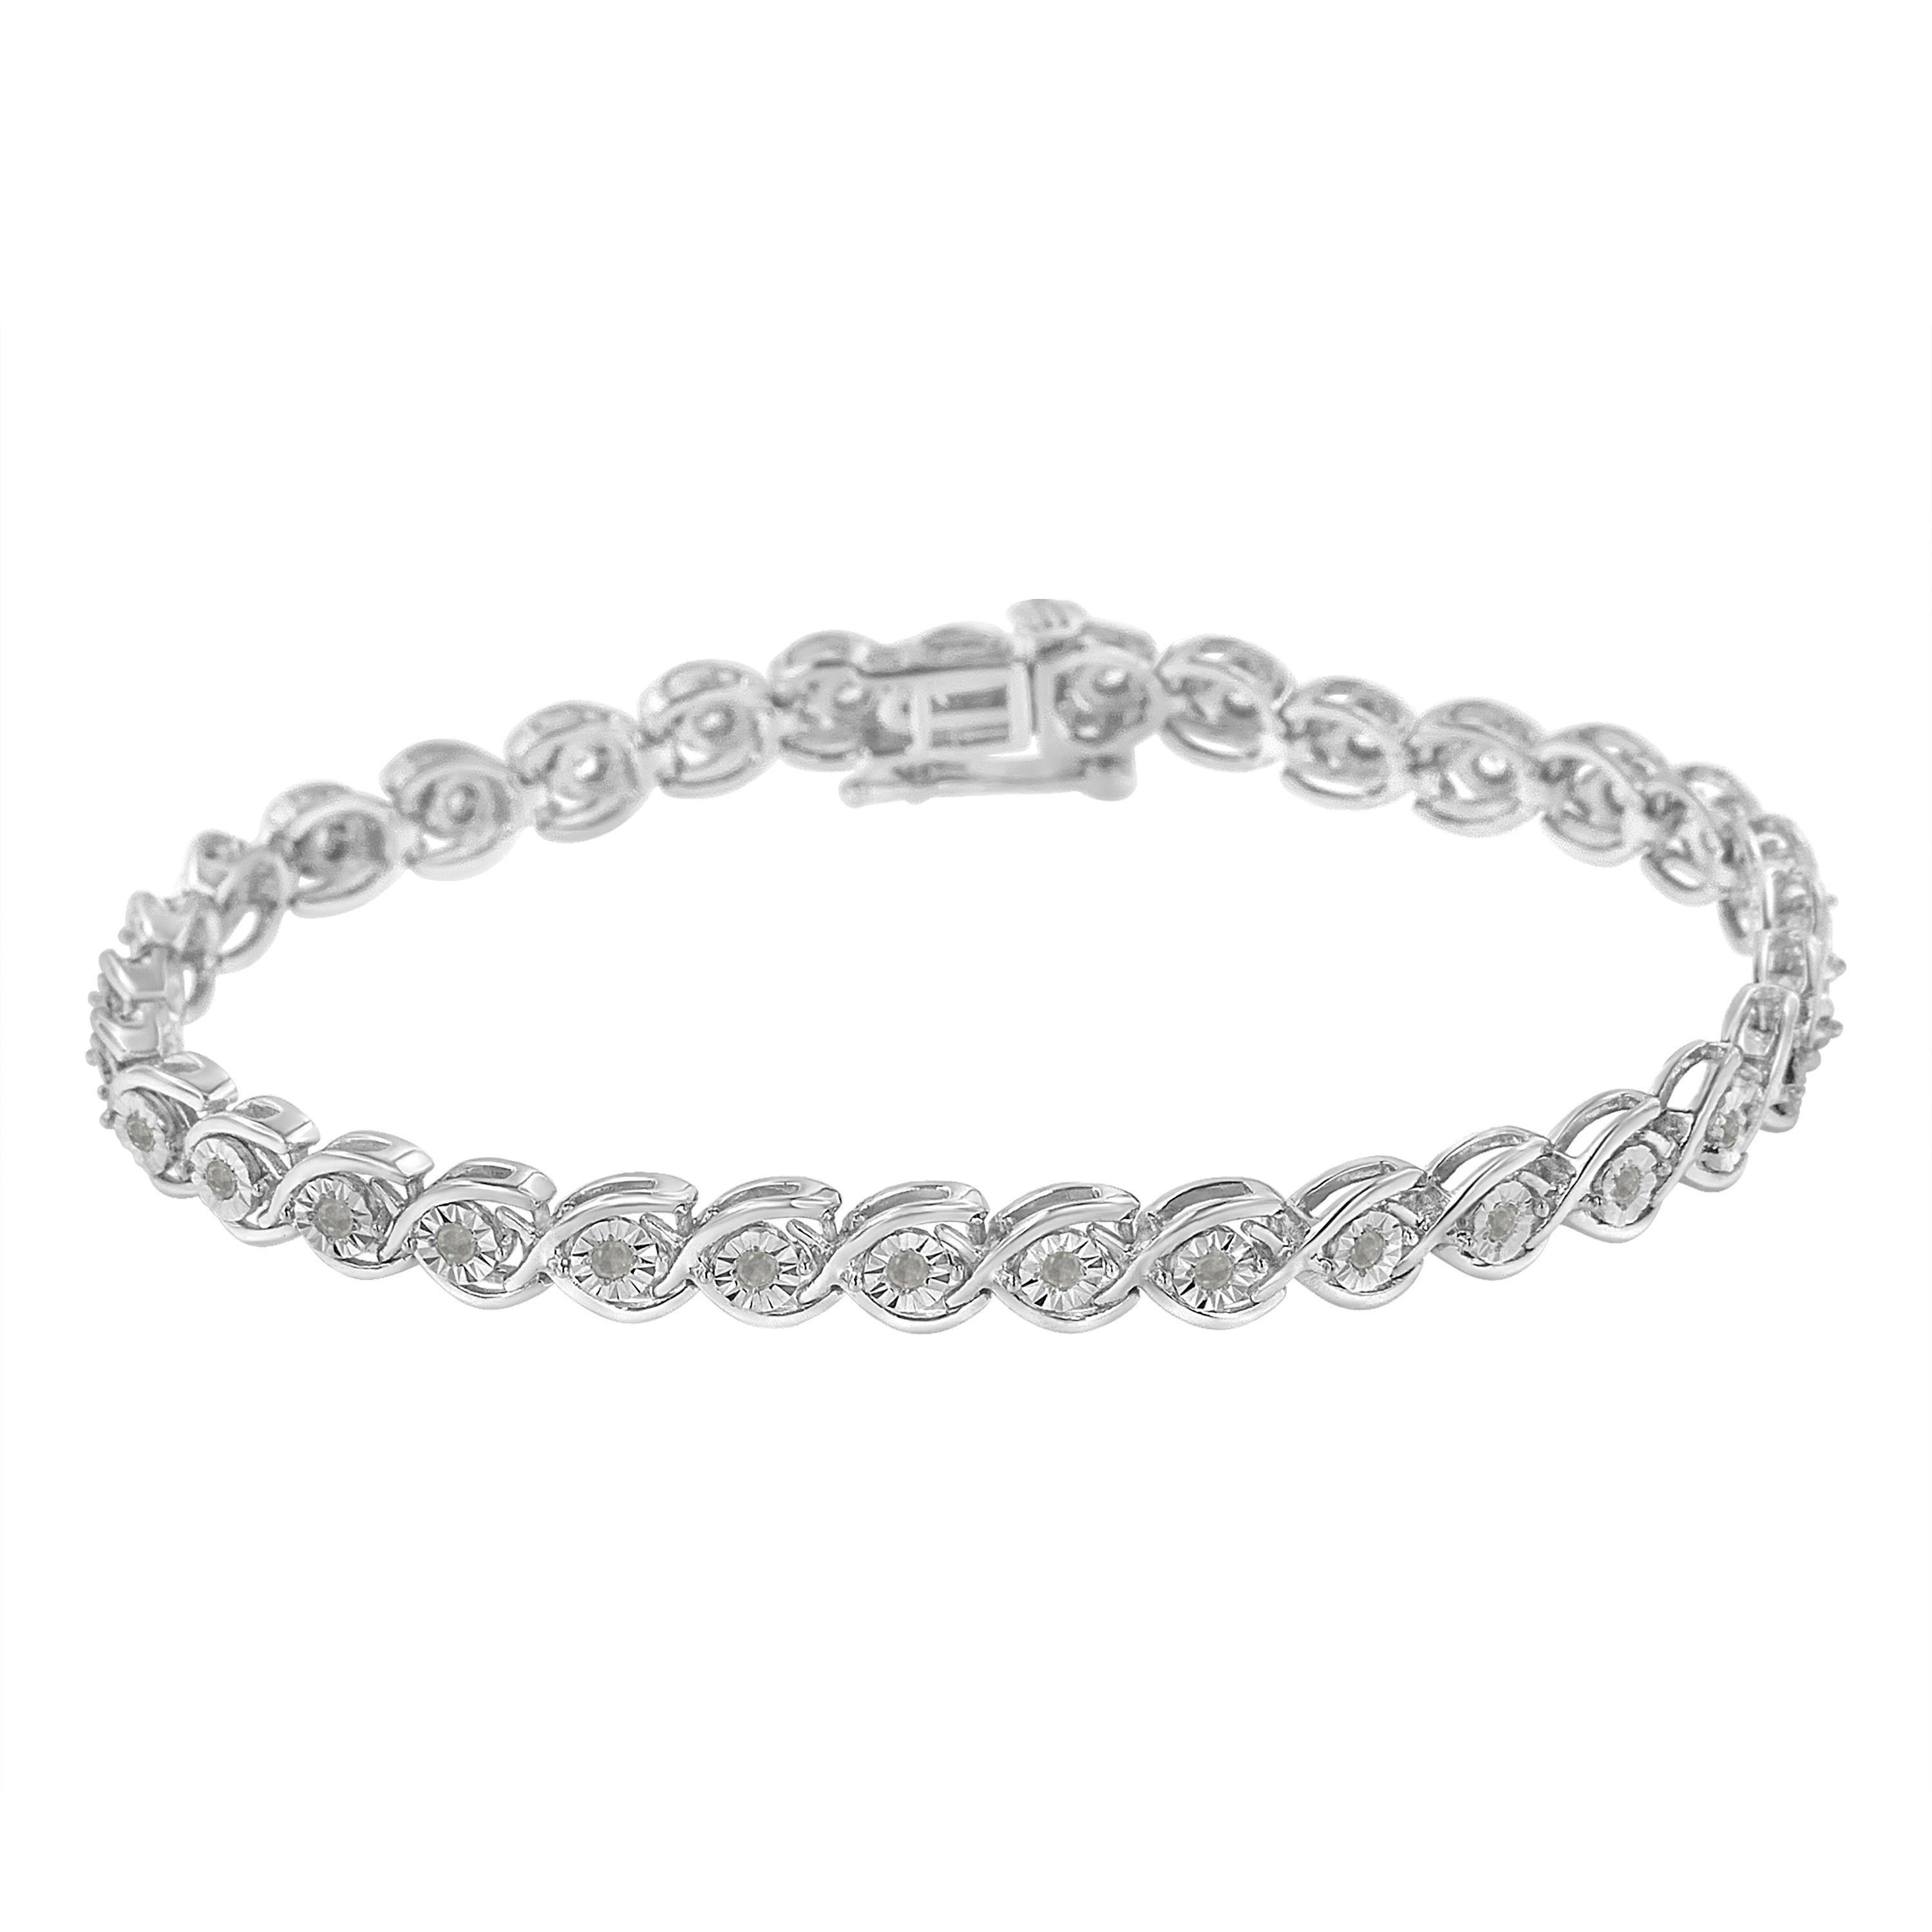 Stylish link bracelet that will make the wonders of your daily life. Made with genuine diamonds and .925 sterling silver in a white plated surface. It presents an elegant floral concept that includes a total of 33 rose-cut diamonds in a miracle